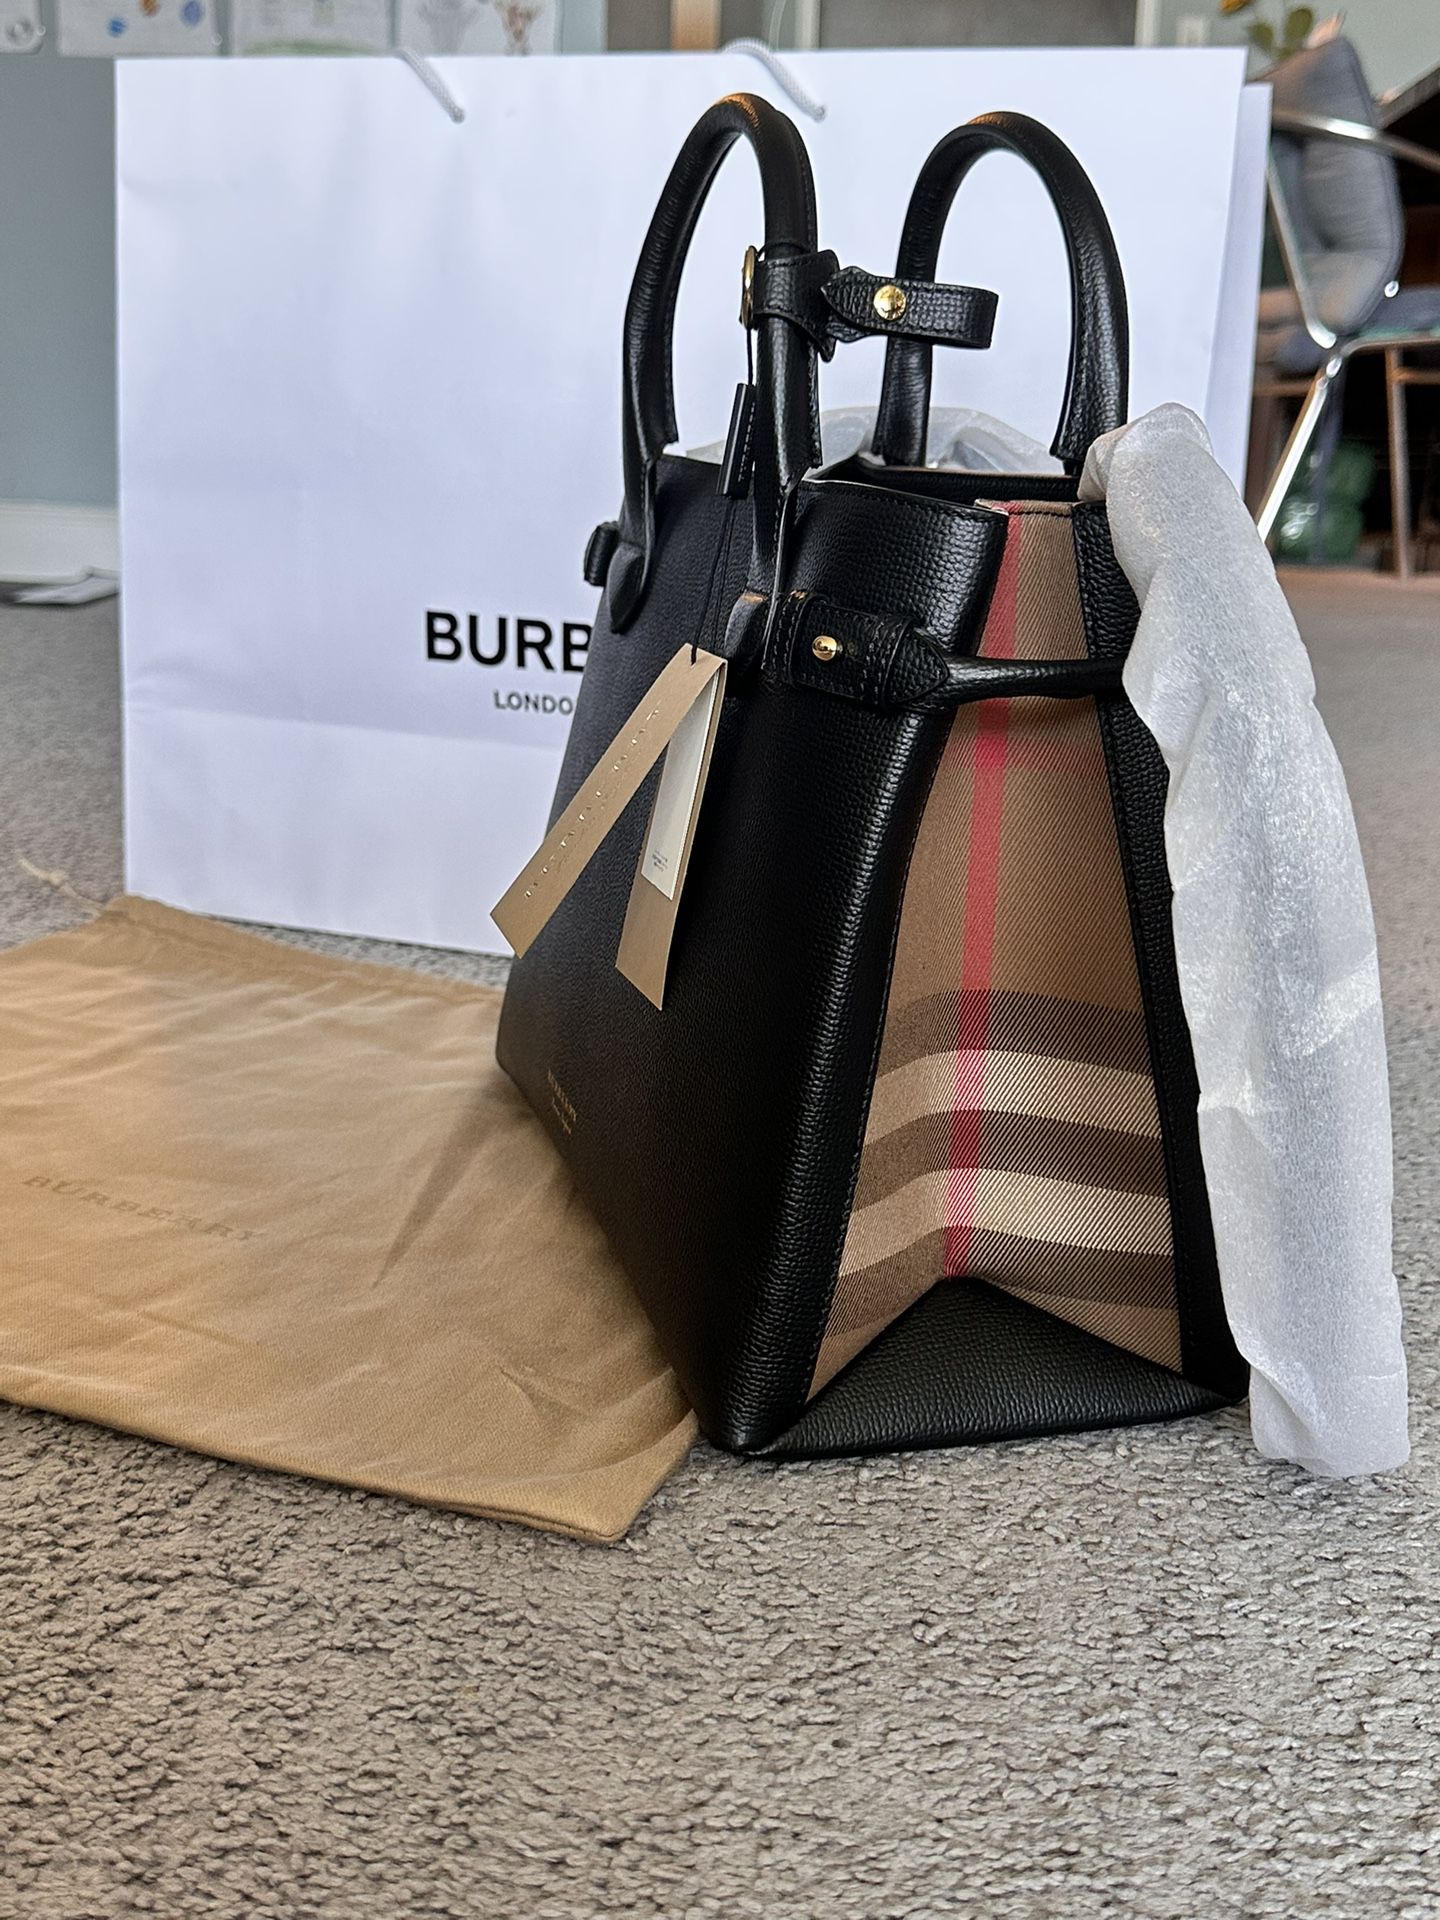 Burberry Leather Banner Tote Bag for Sale in Miami Beach, FL